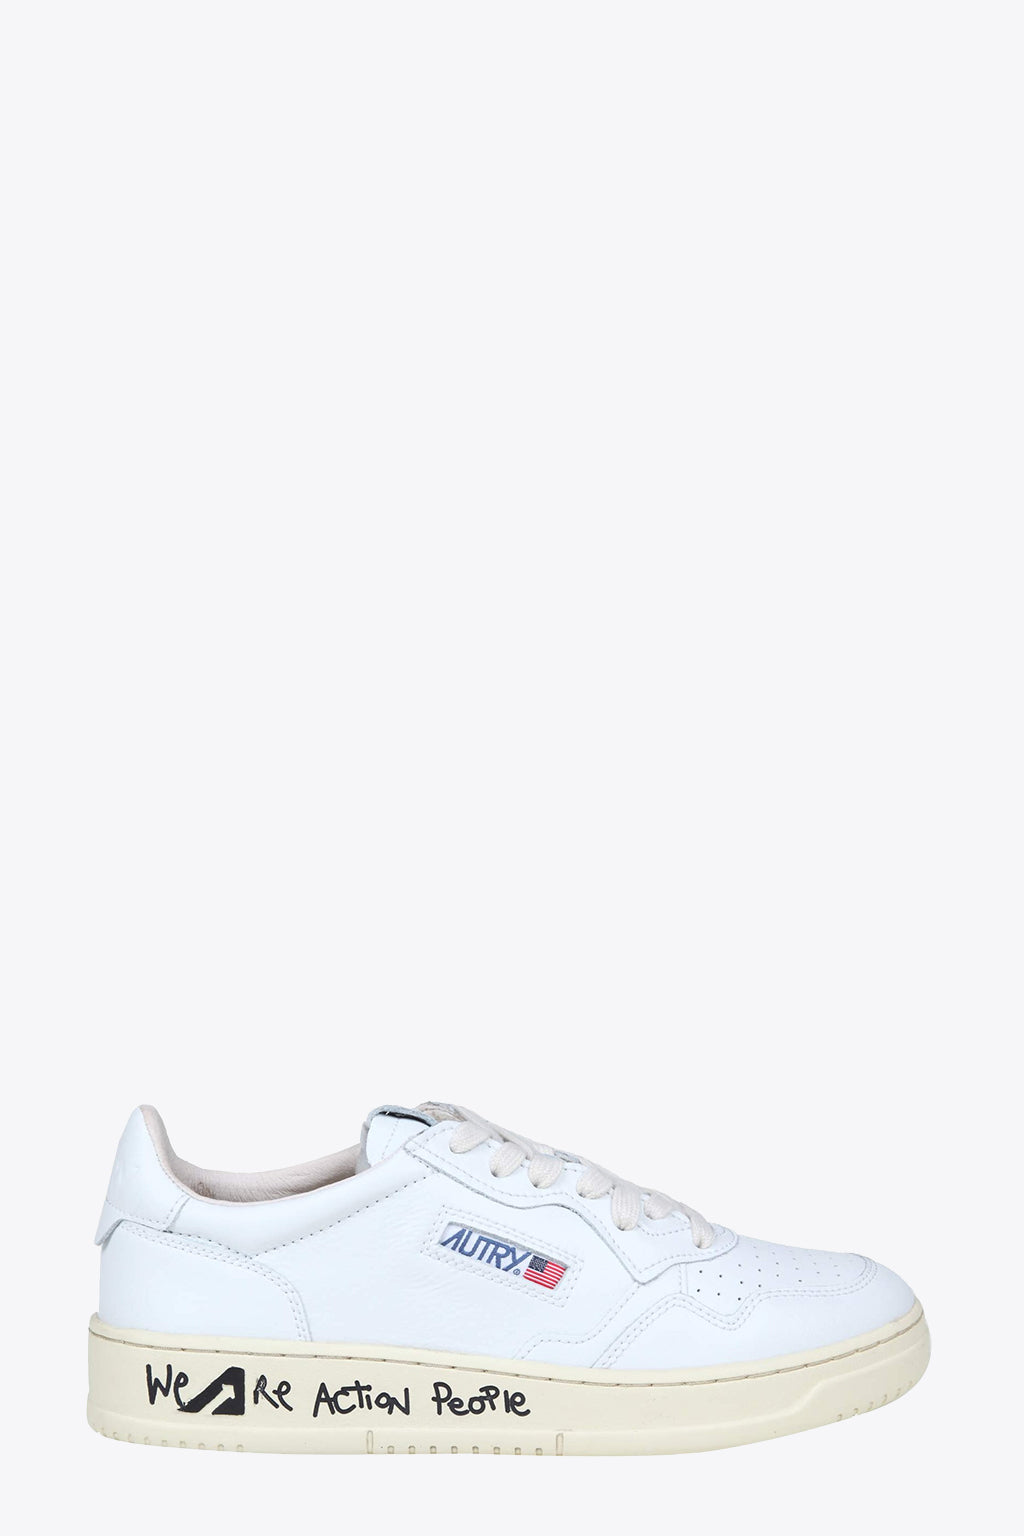 alt-image__White-leather-low-sneaker-with-printed-sole---Medalist